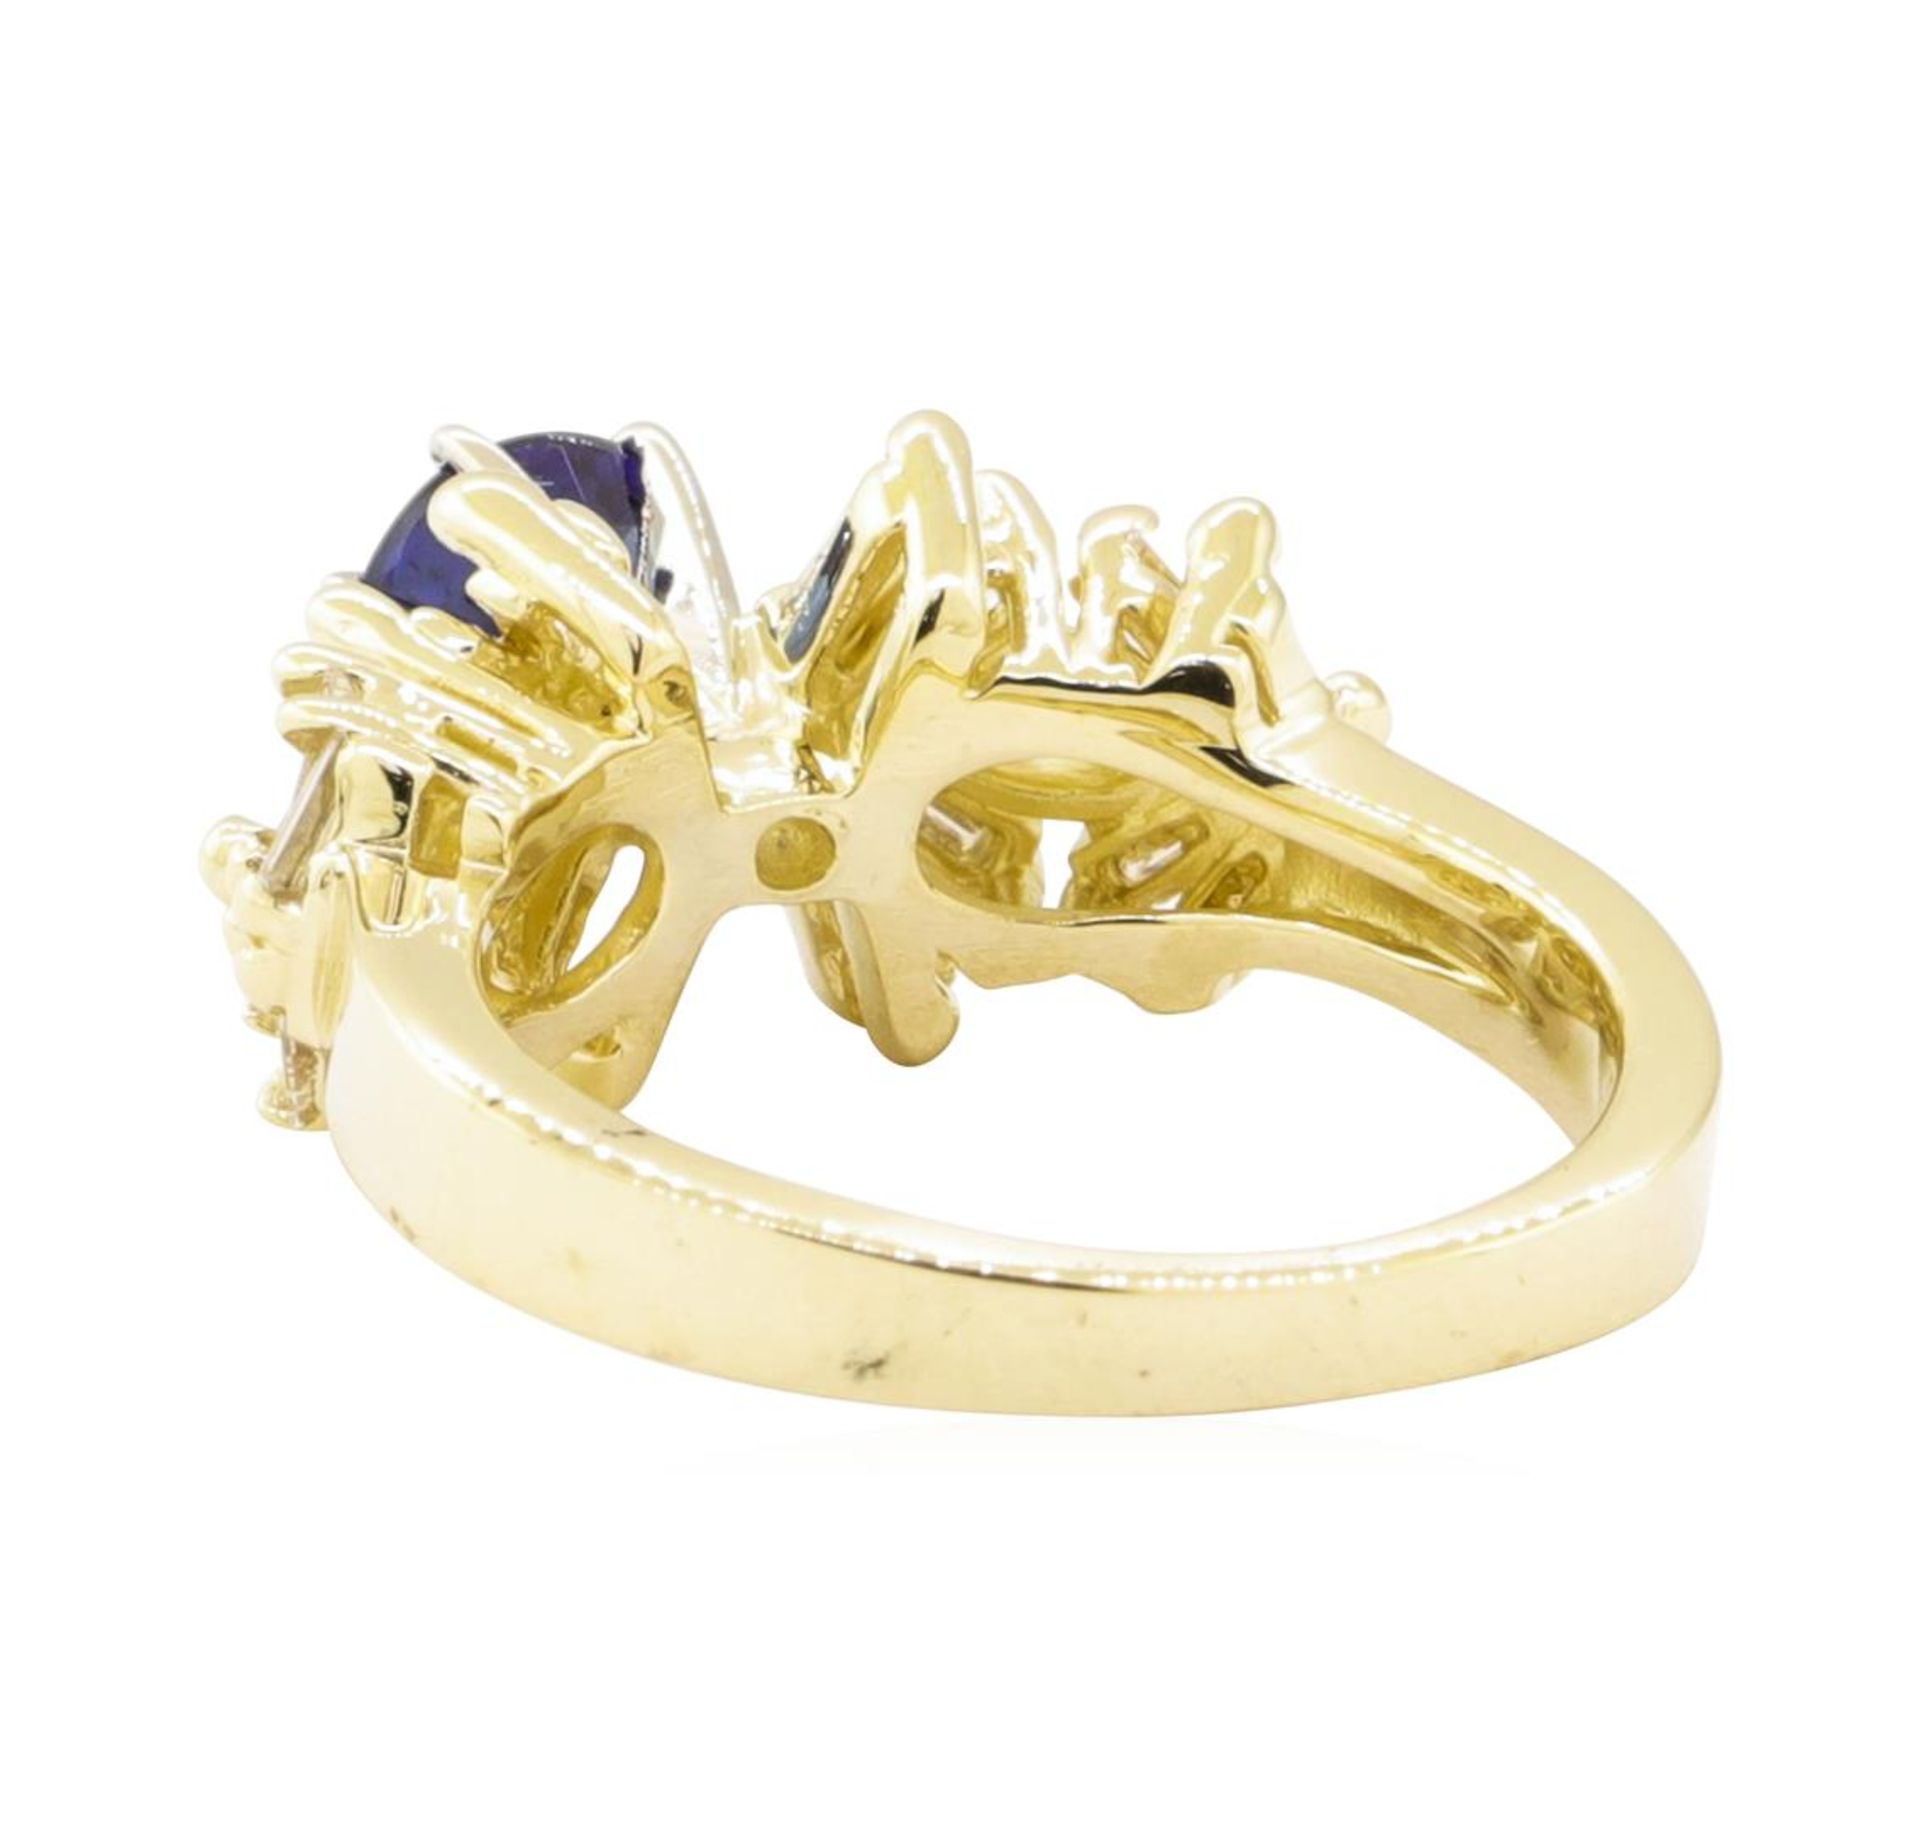 1.60 ctw Blue Sapphire And Diamond Ring - 14KT Yellow Gold - Image 3 of 5